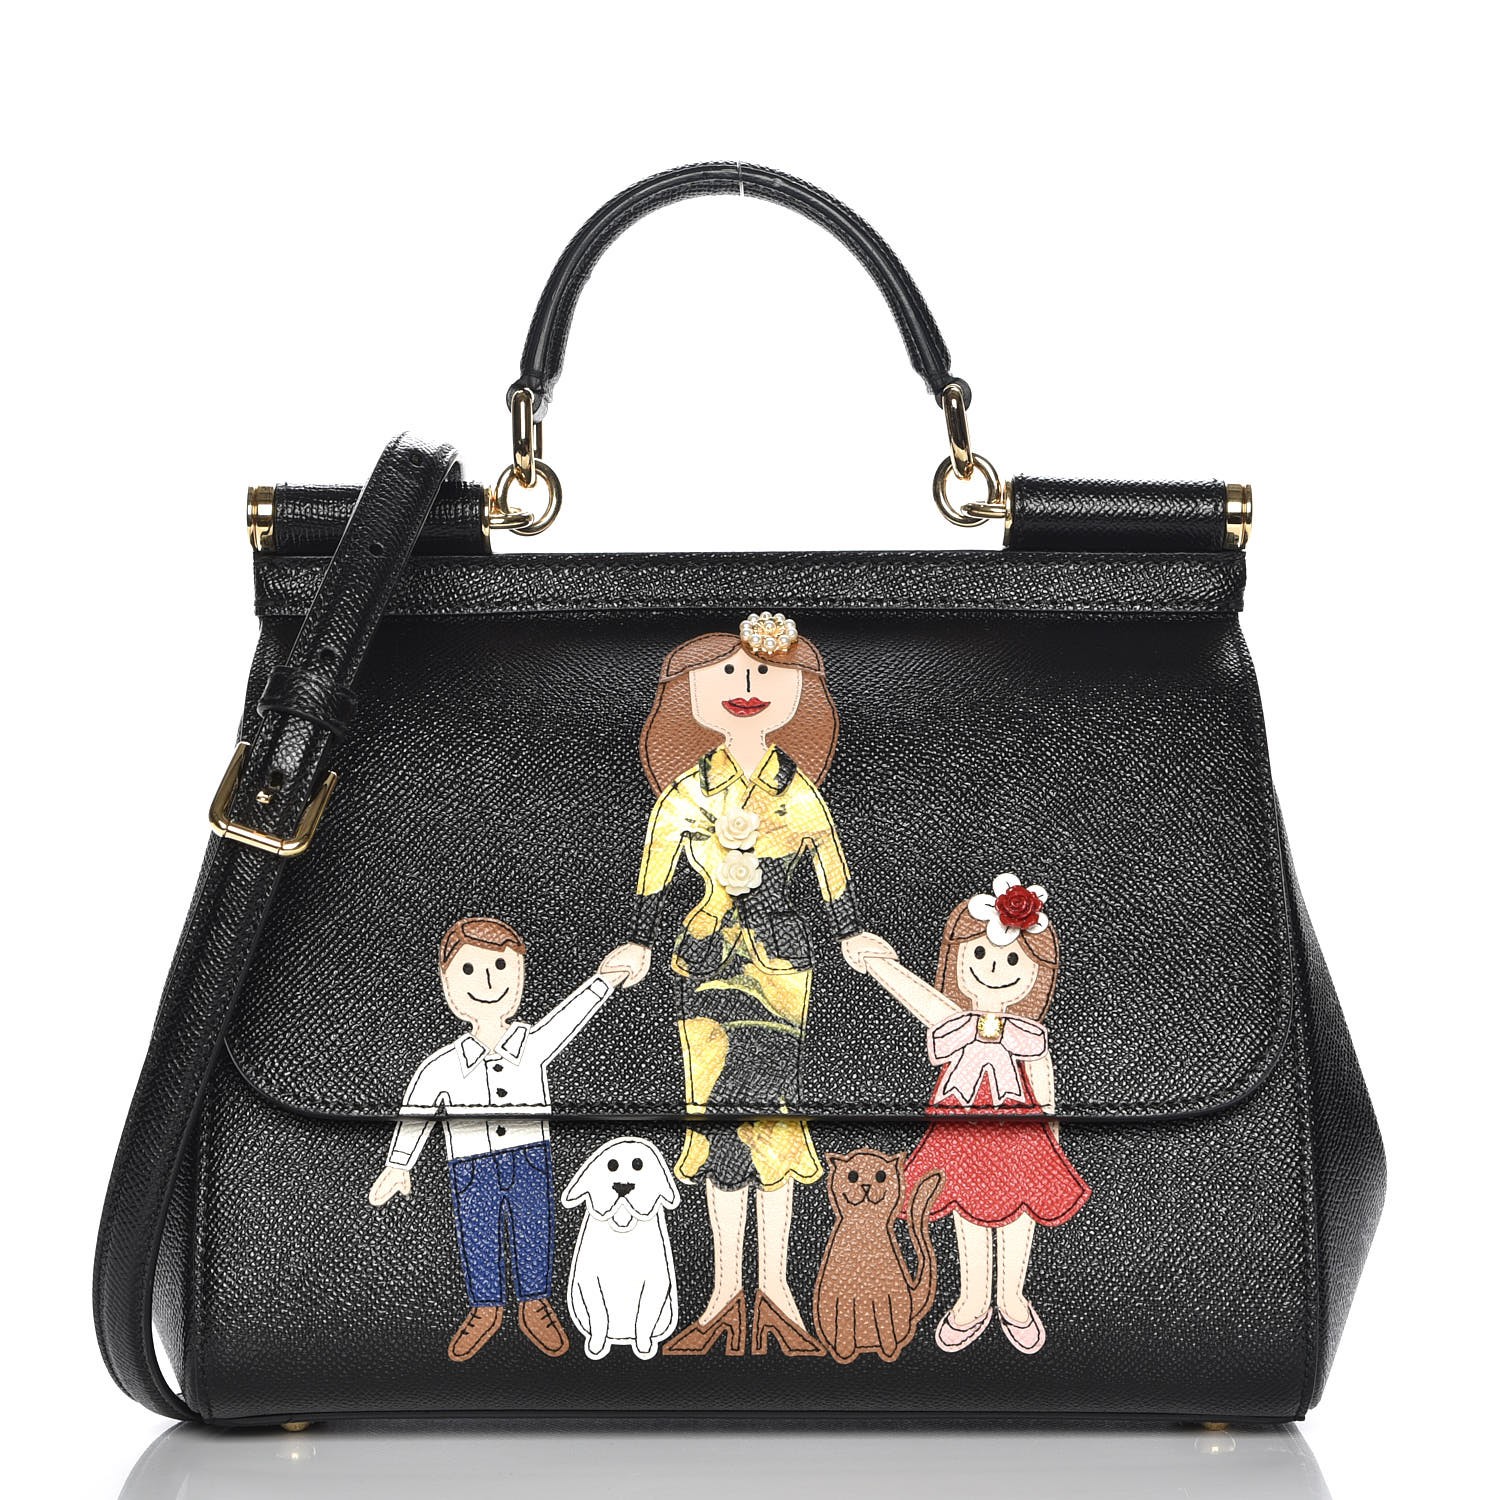 dolce and gabbana family bag